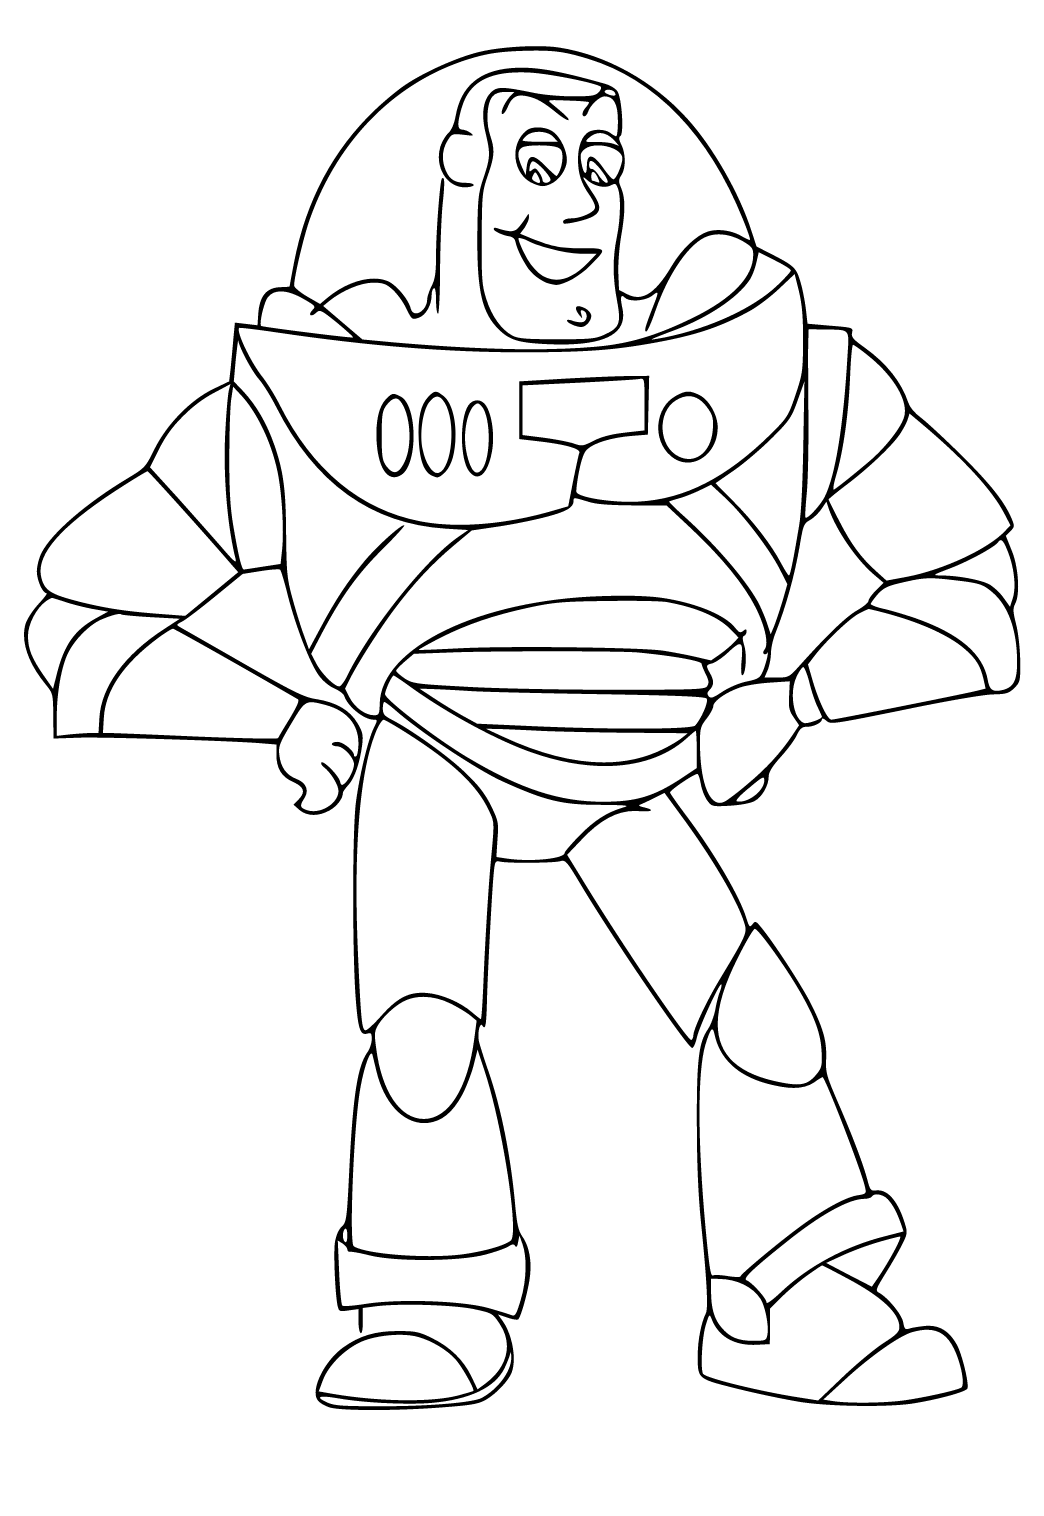 buzz lightyear spaceship coloring page